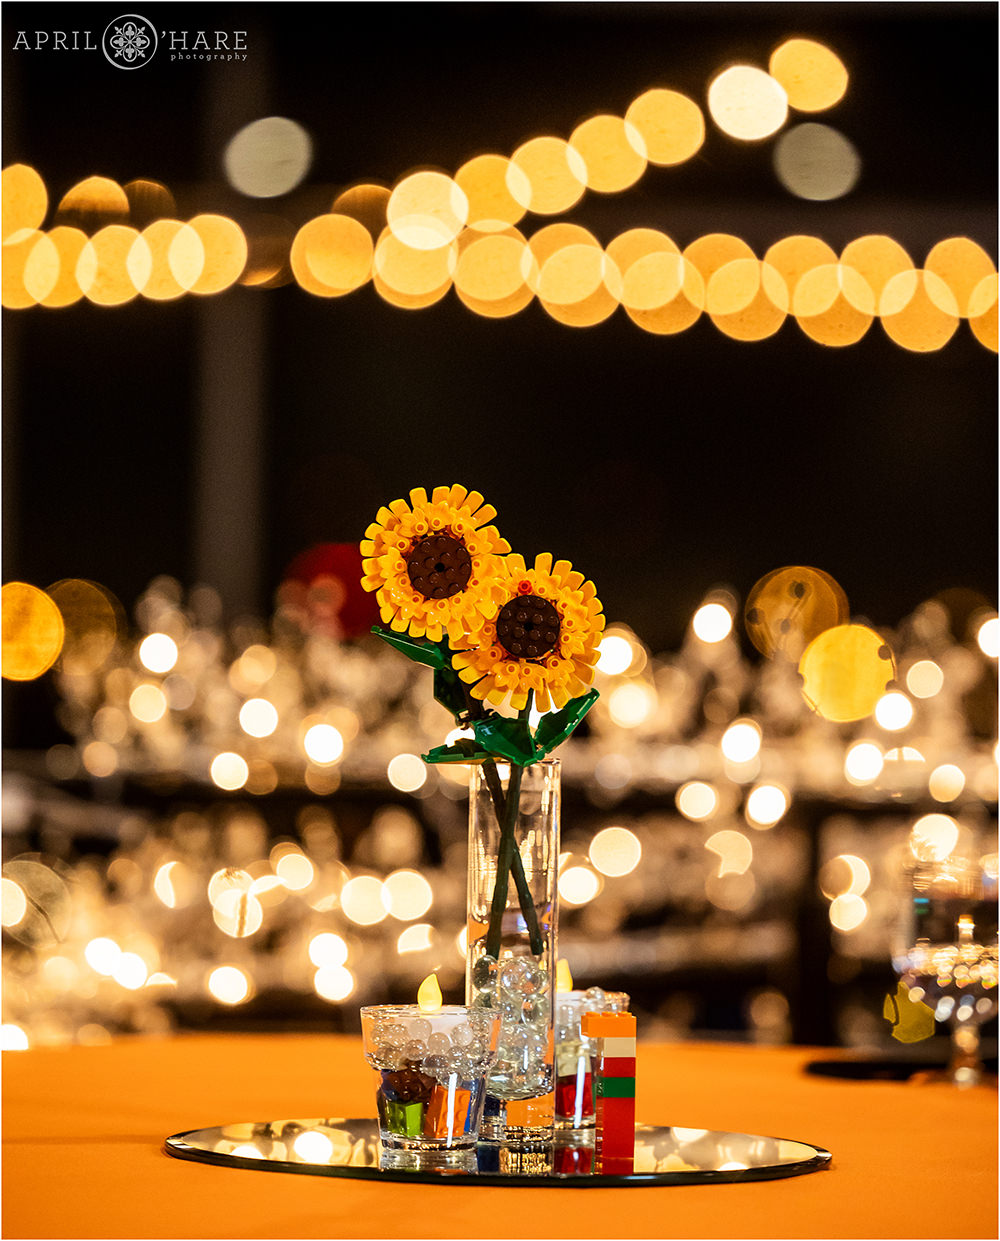 Yellow sunflowers made out of legos for a Lego themed bar mitzvah party at Curtis Ballroom in Greenwood Village, CO